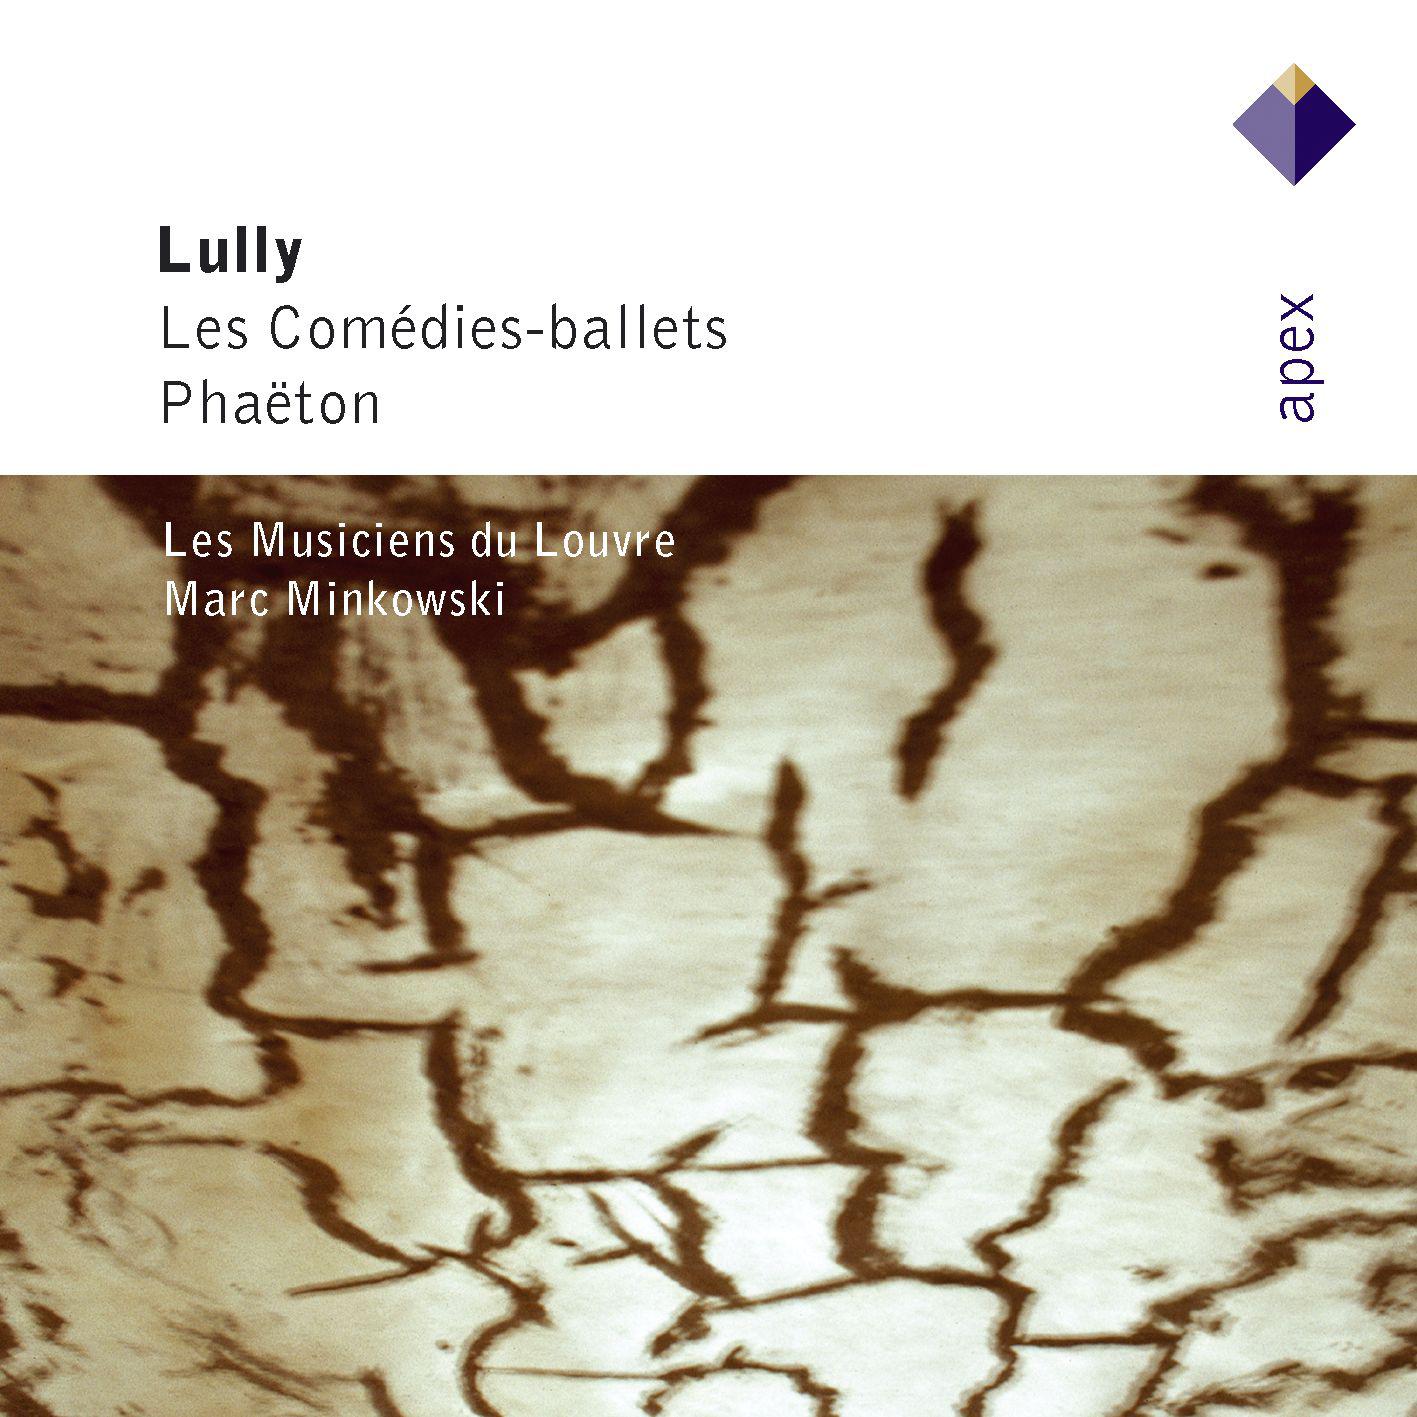 Lully: Pha ton : Prologue Overture